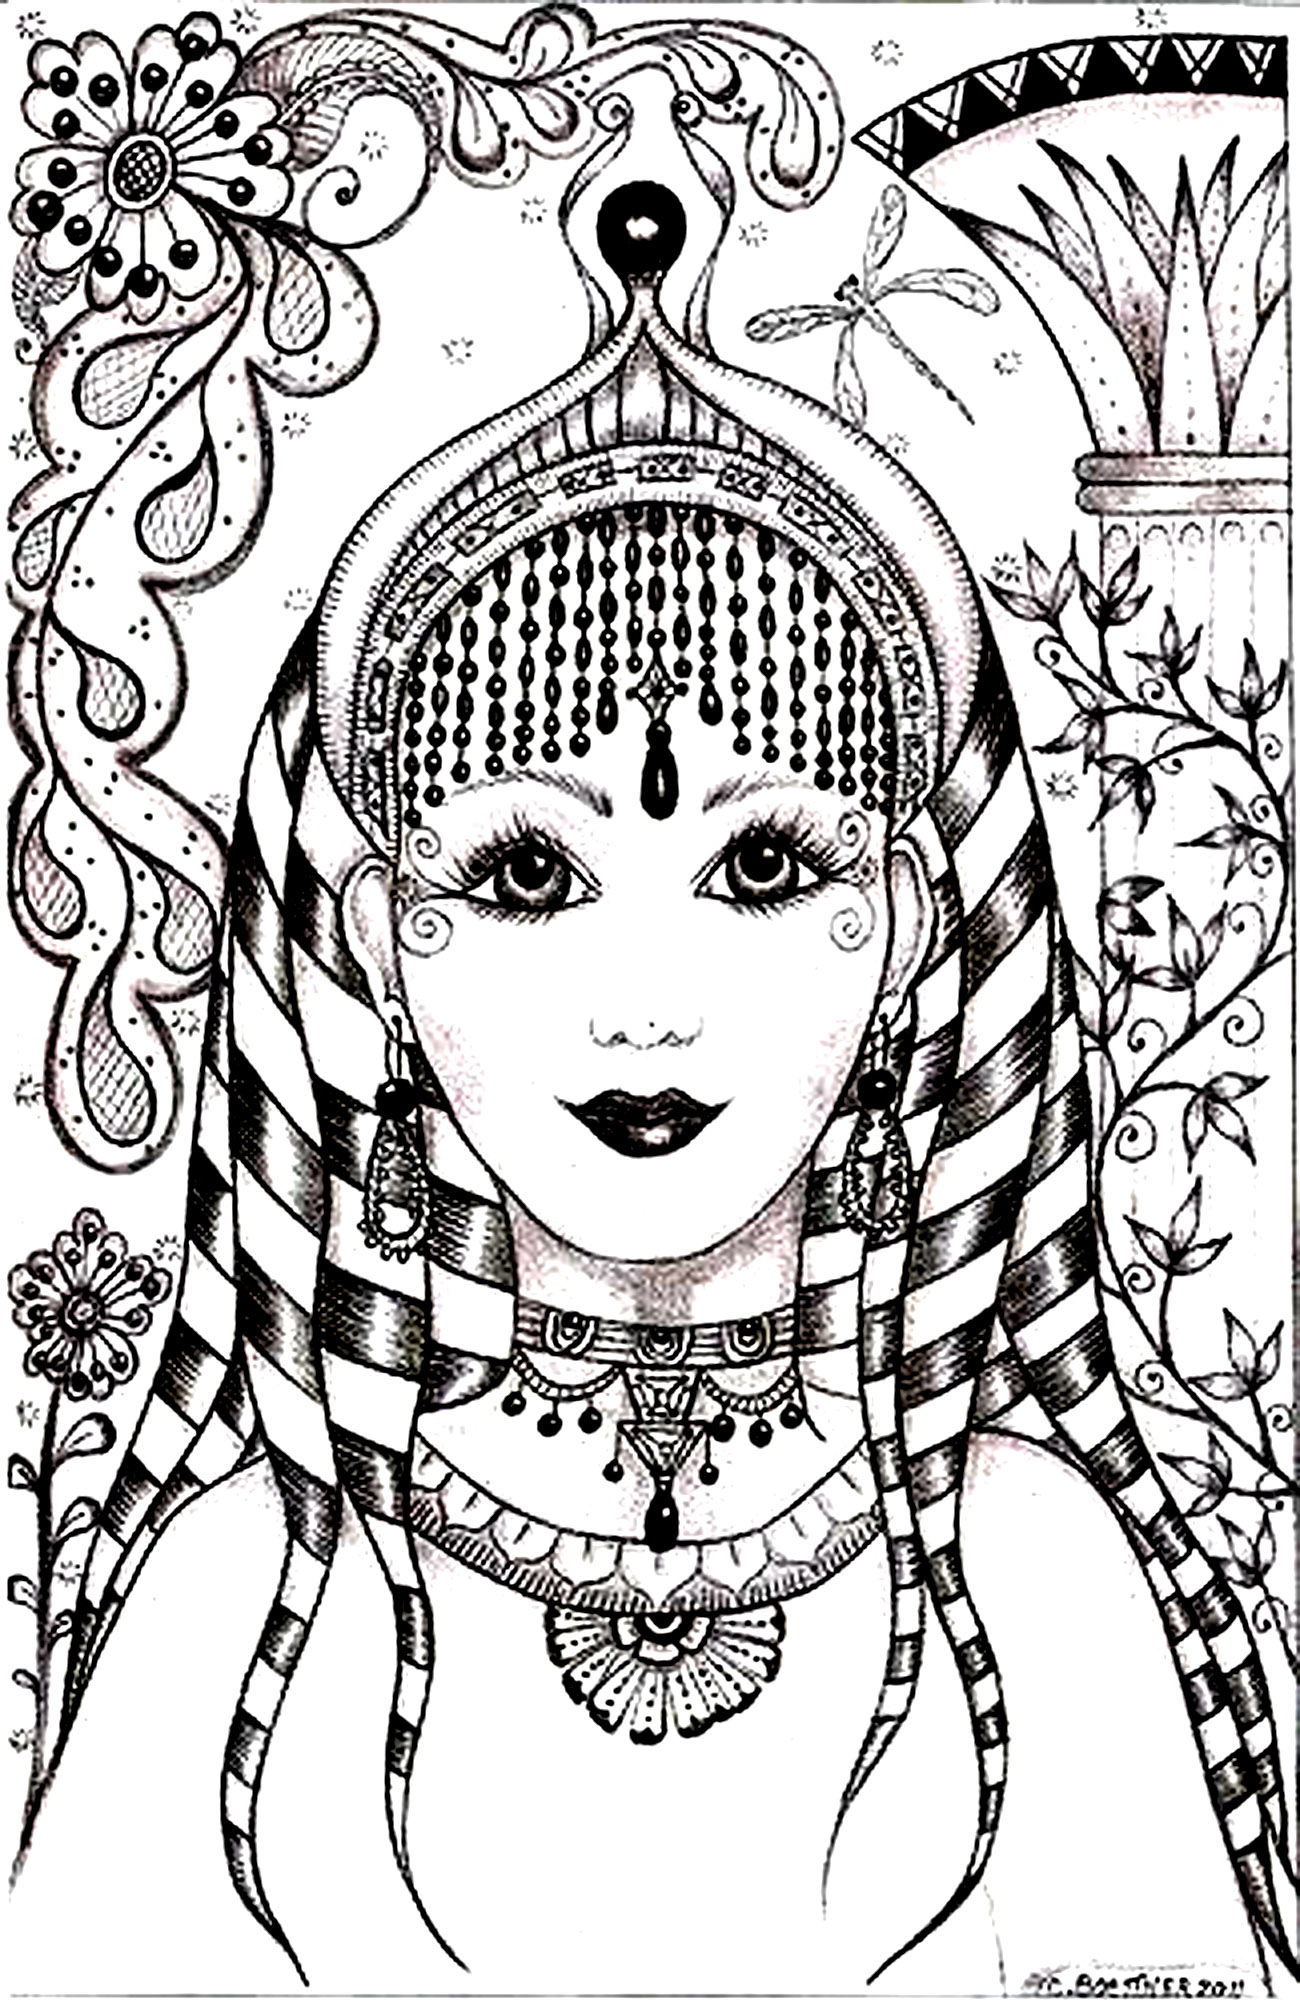 Woman face india inspiration - India Adult Coloring Pages